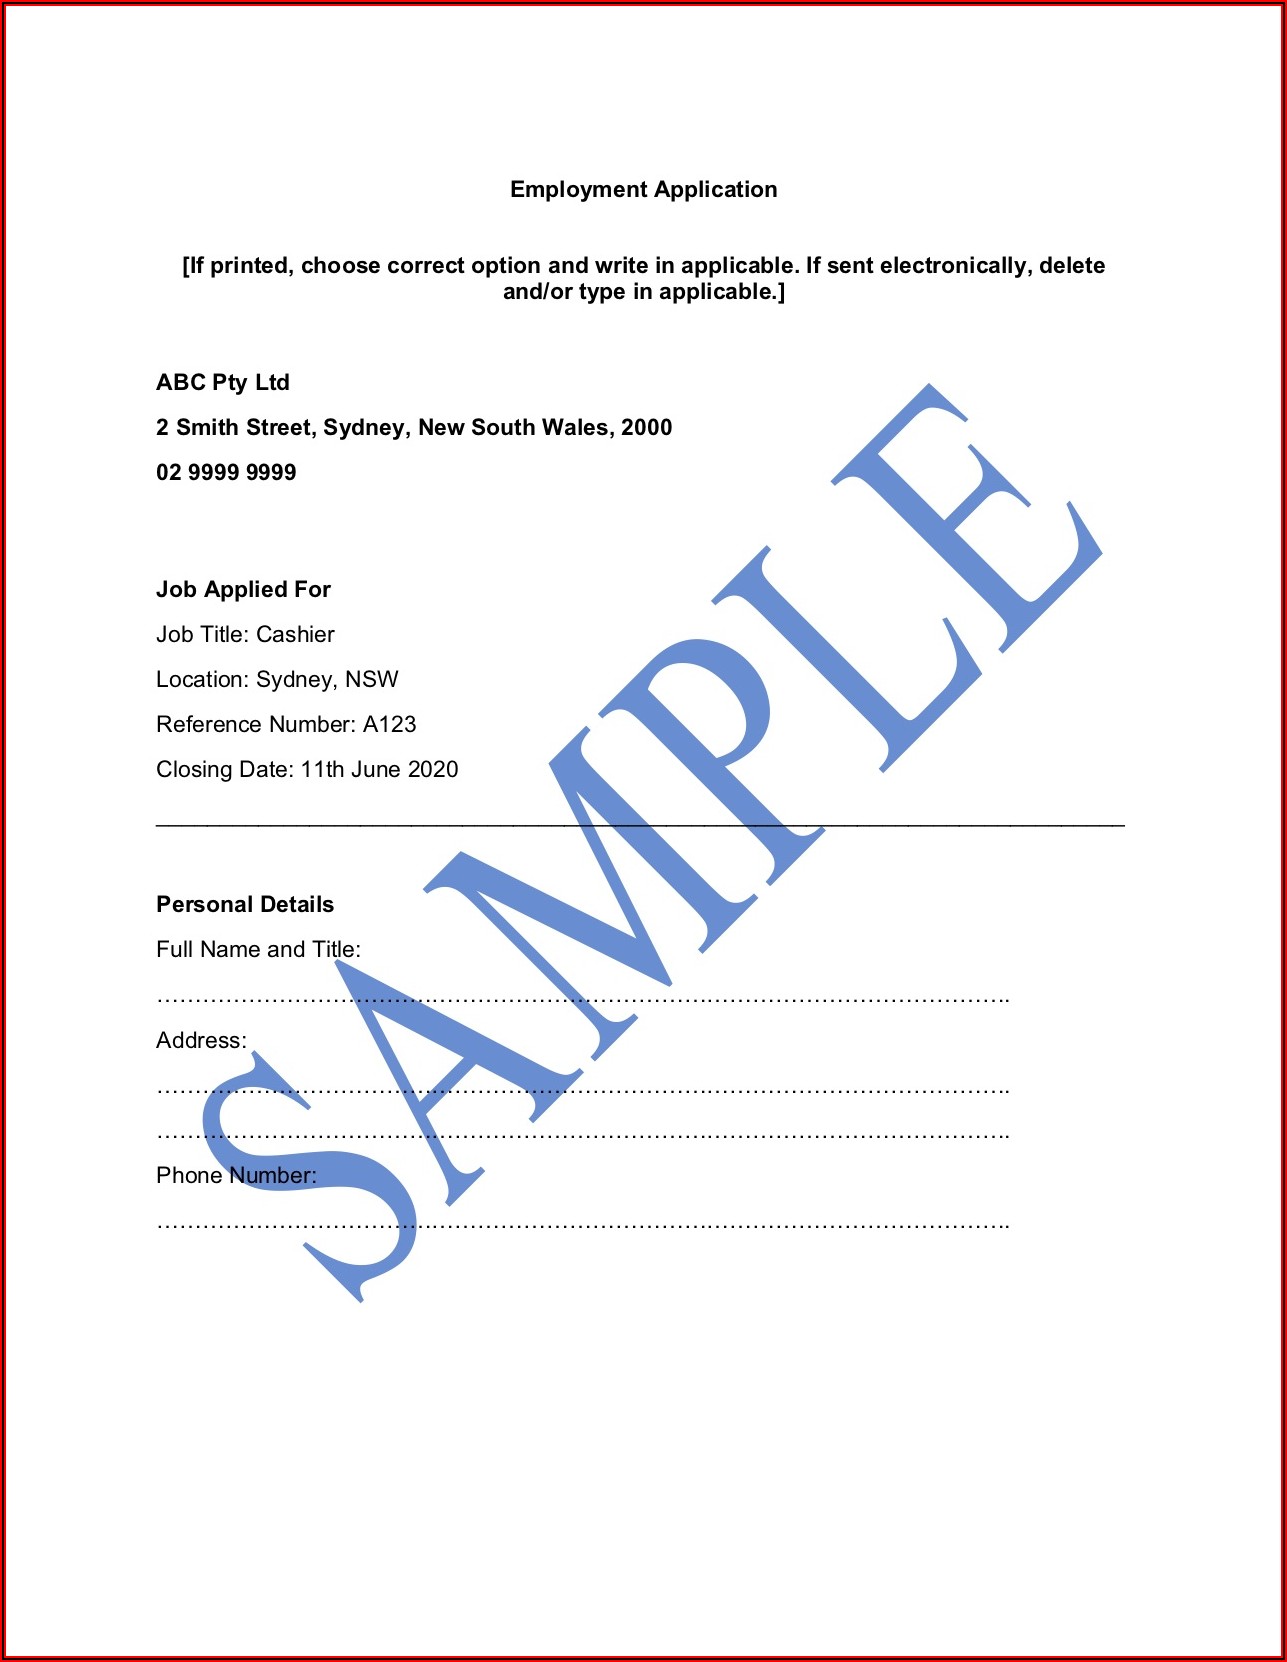 Free Employment Application Form Template